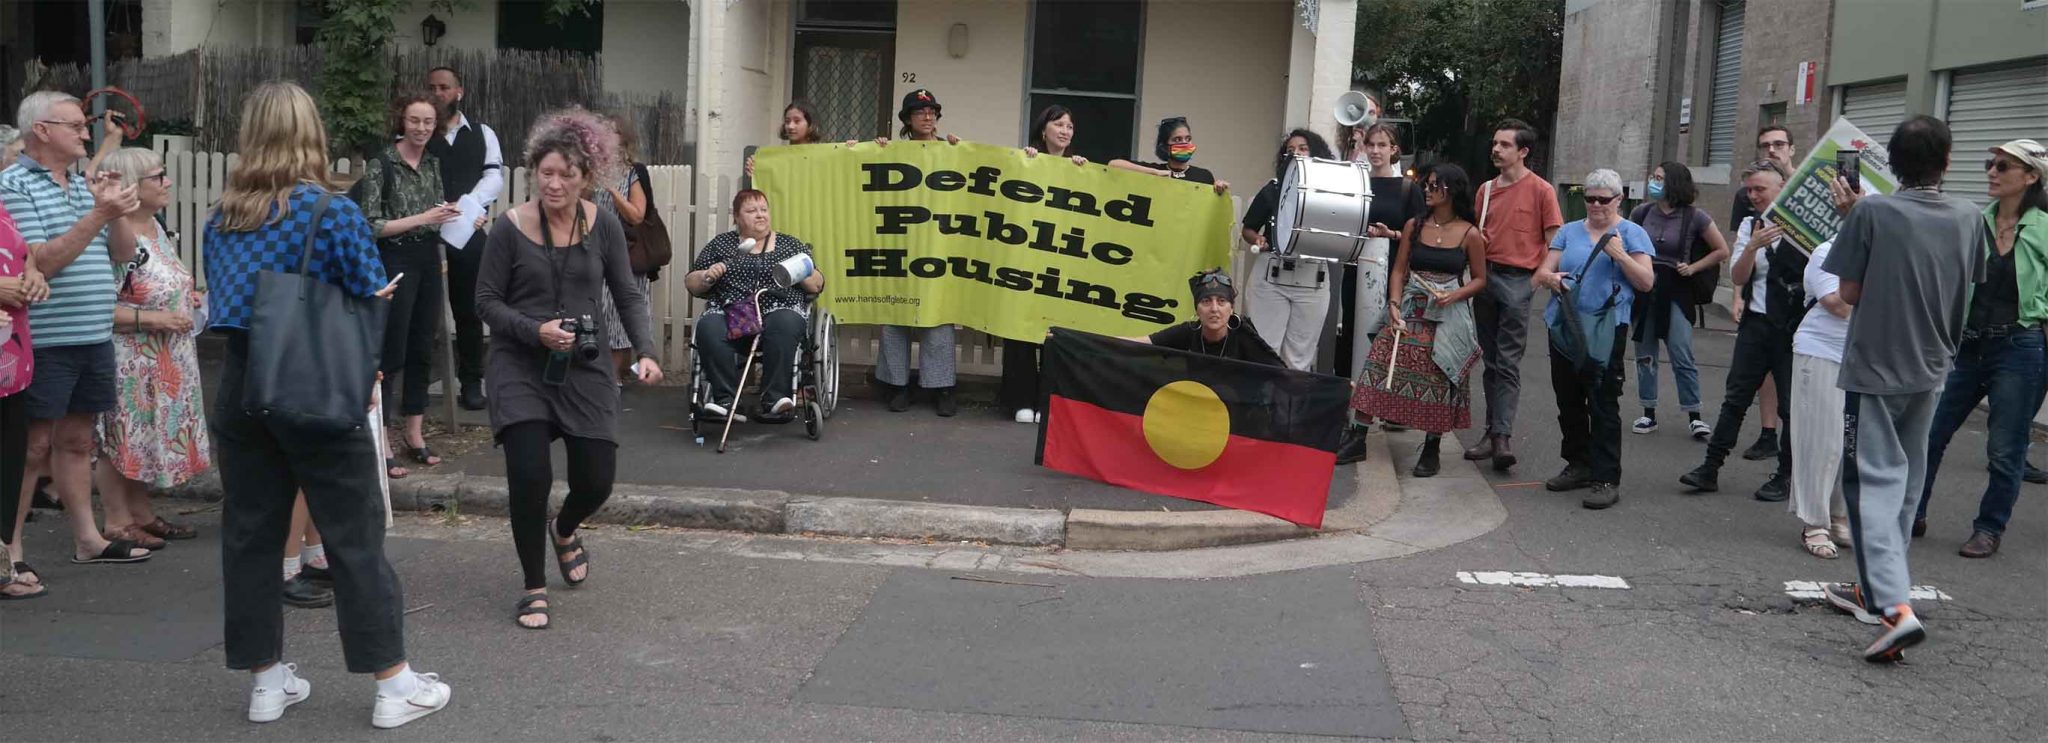 Community takes action against increasing destruction of public housing in the inner city